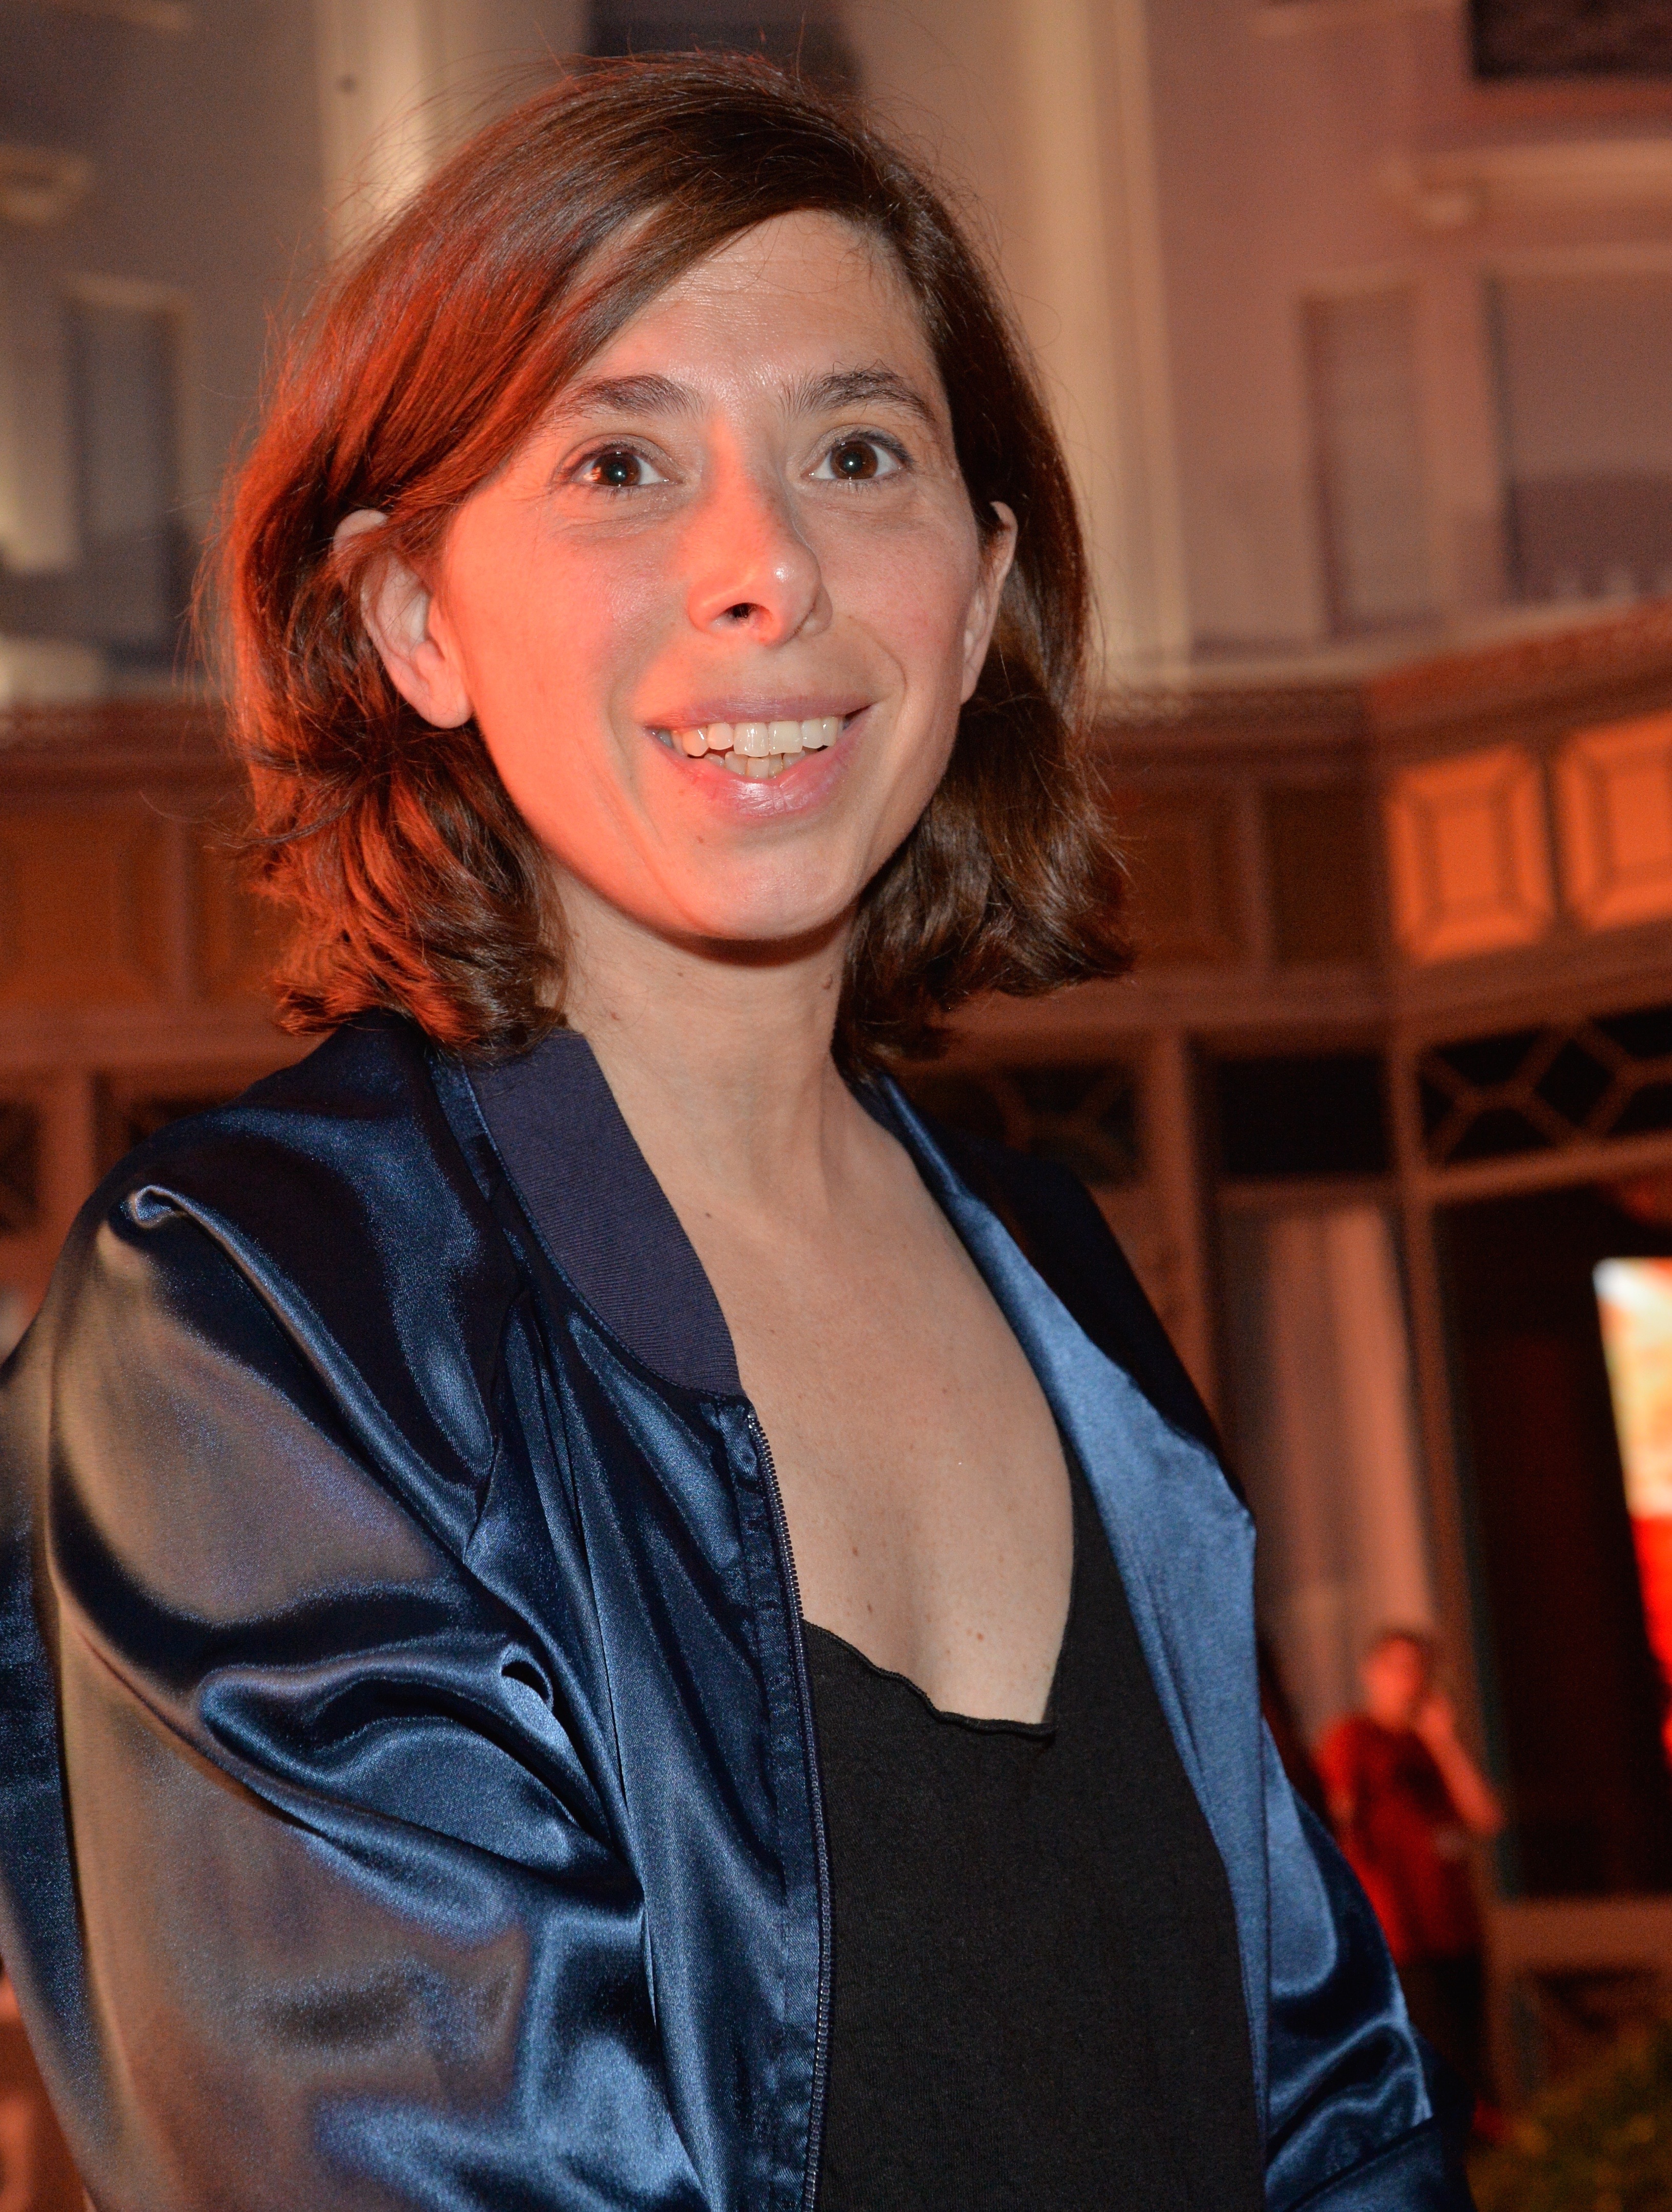 Marcia Romano at the Cannes Film Festival 2015 (May 16, 2015)